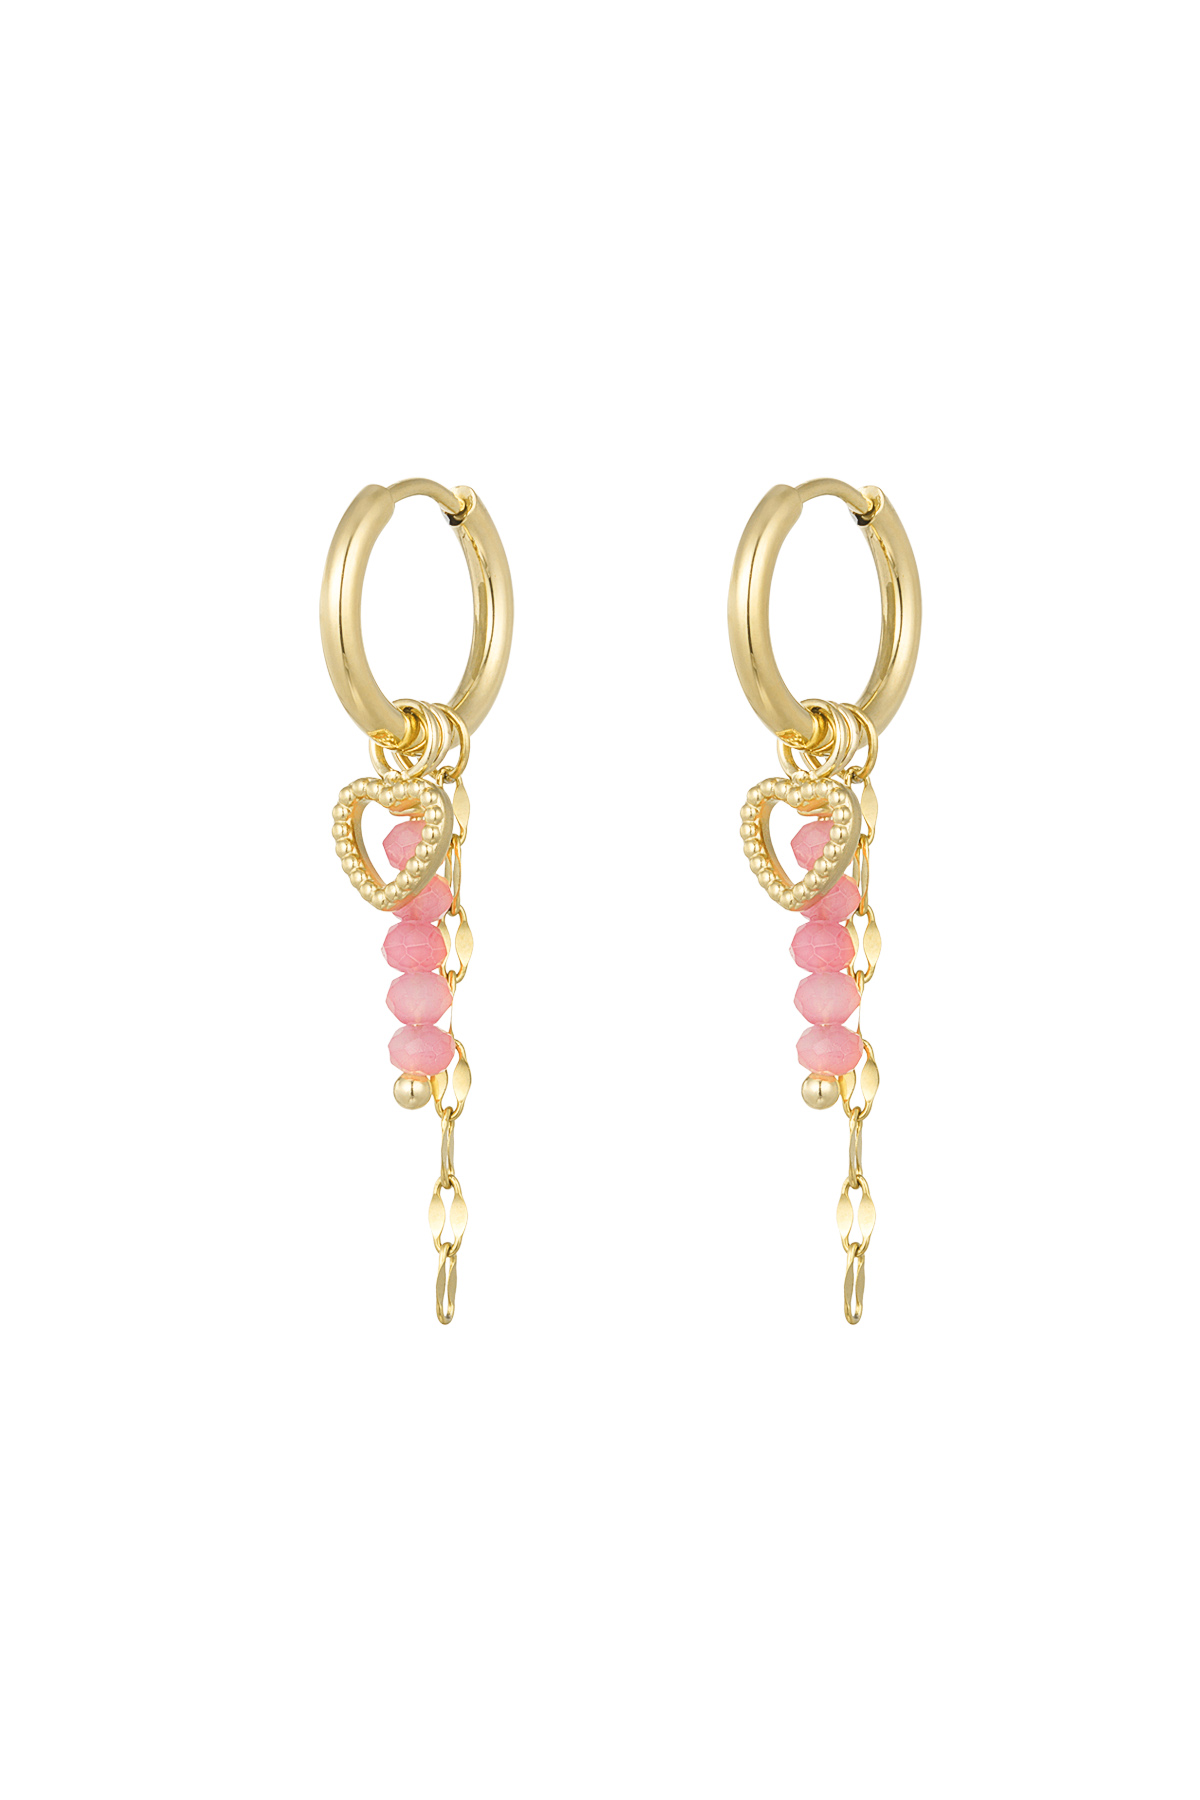 Boucles d'oreilles charms Love on top - rose/or 